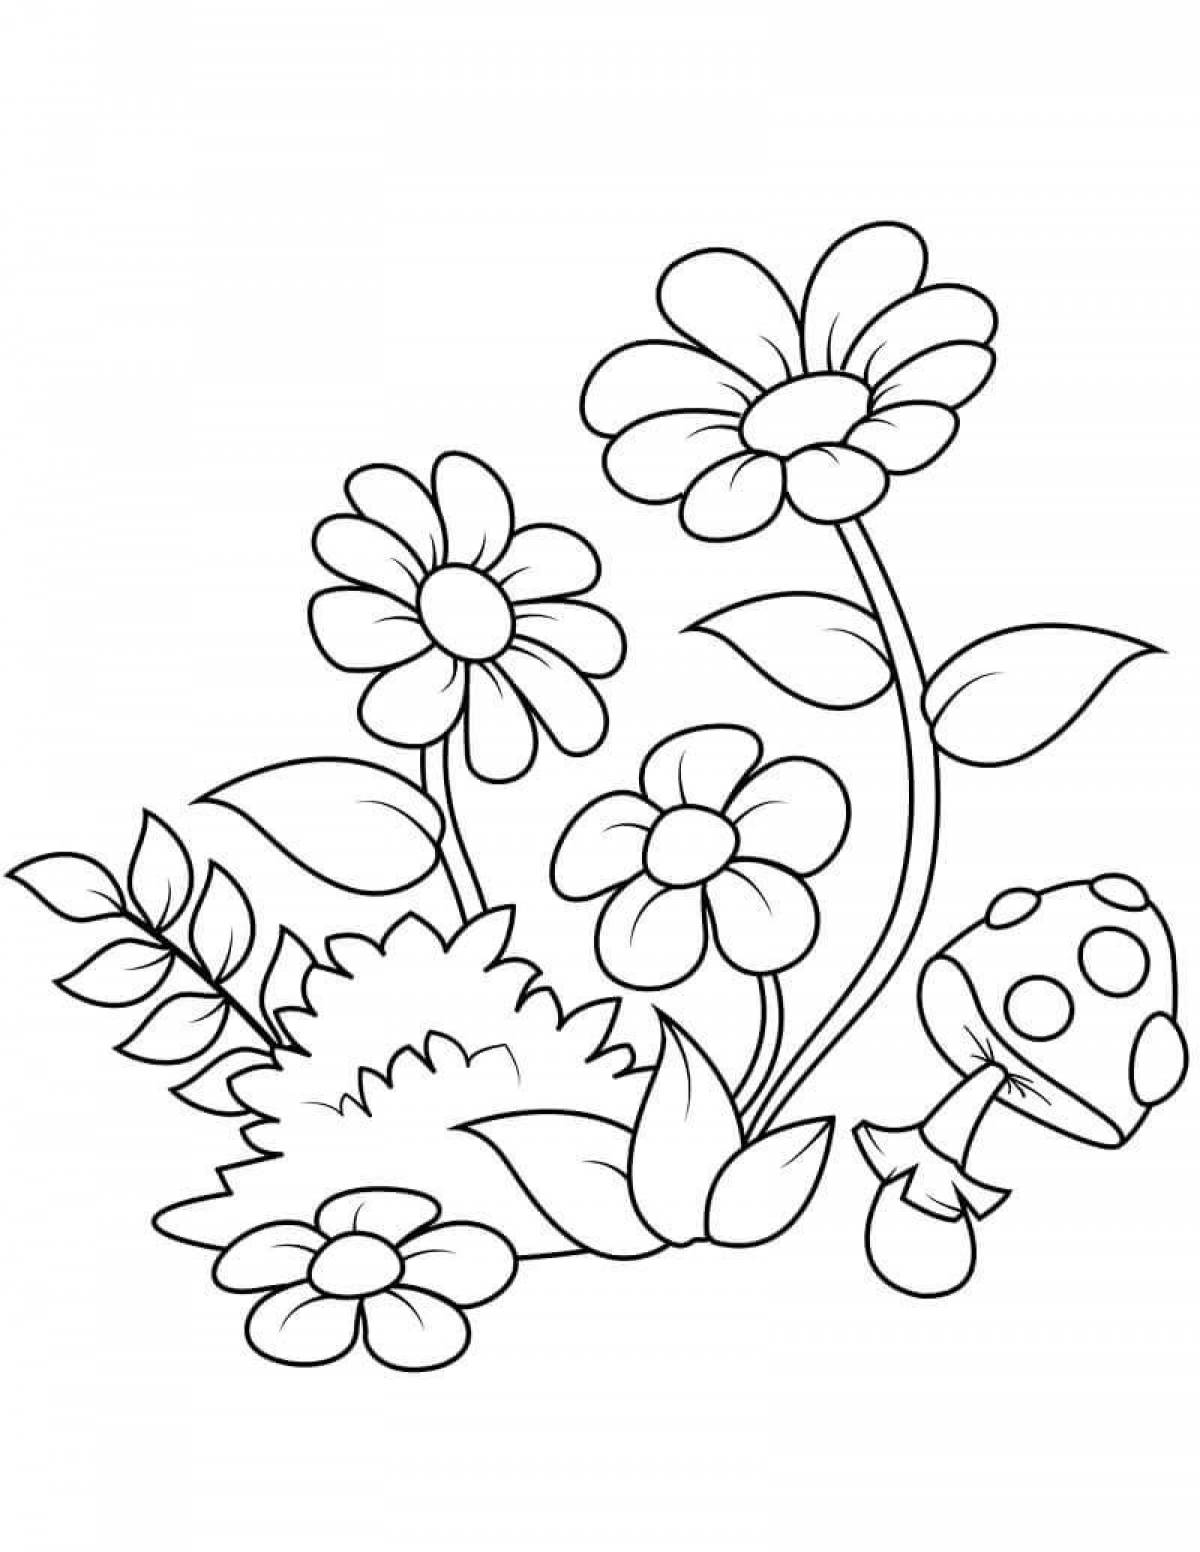 Colorful wild flowers coloring pages for kids